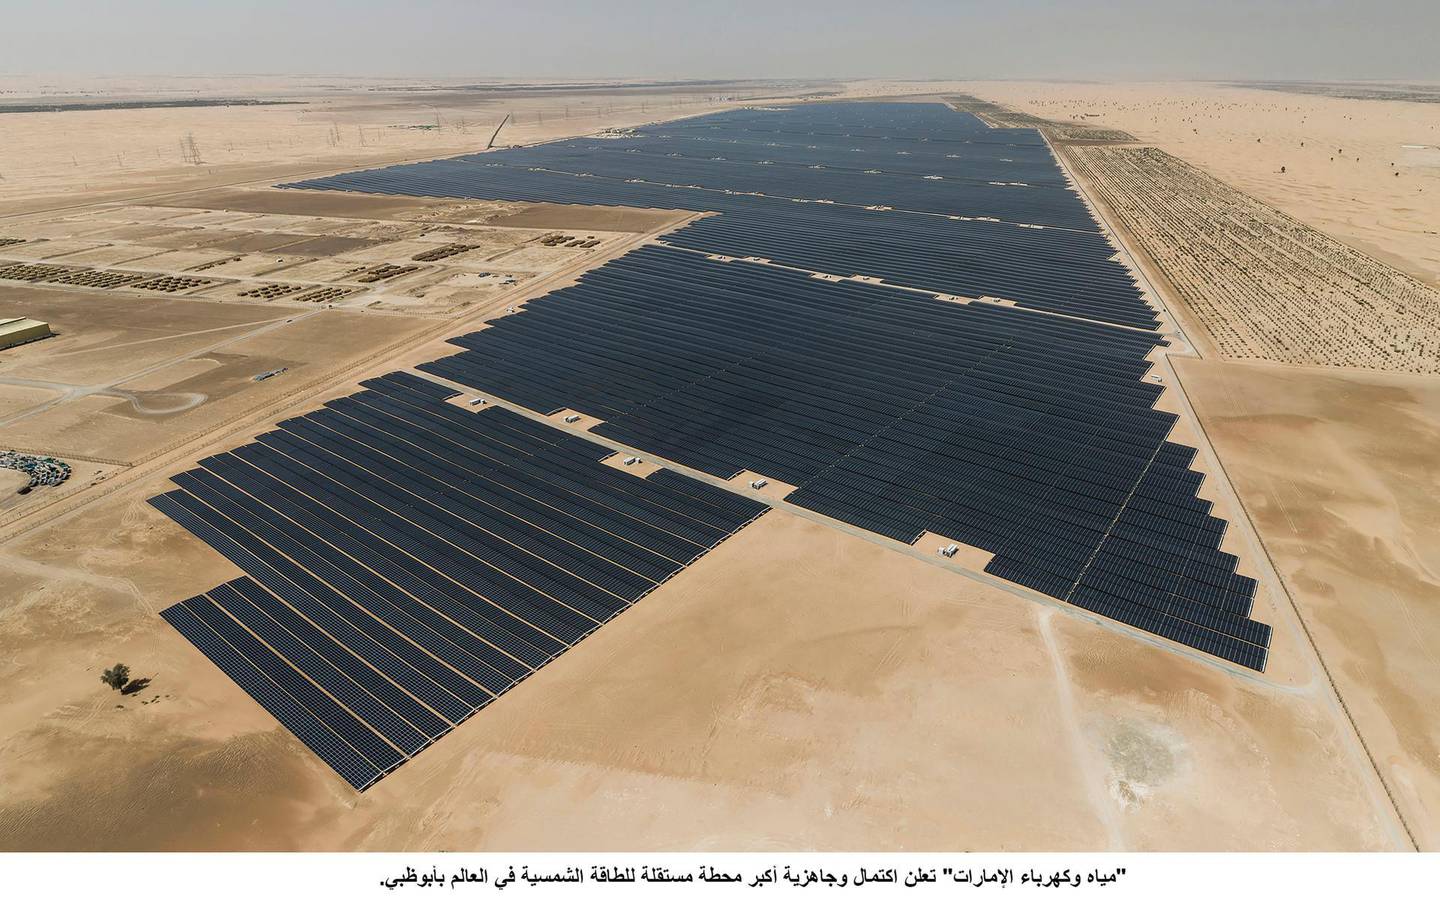 Abu Dhabi National Energy Company, along with other partners, is building the world’s largest solar power plant in Al Dhafra region of Abu Dhabi. Photo: Wam